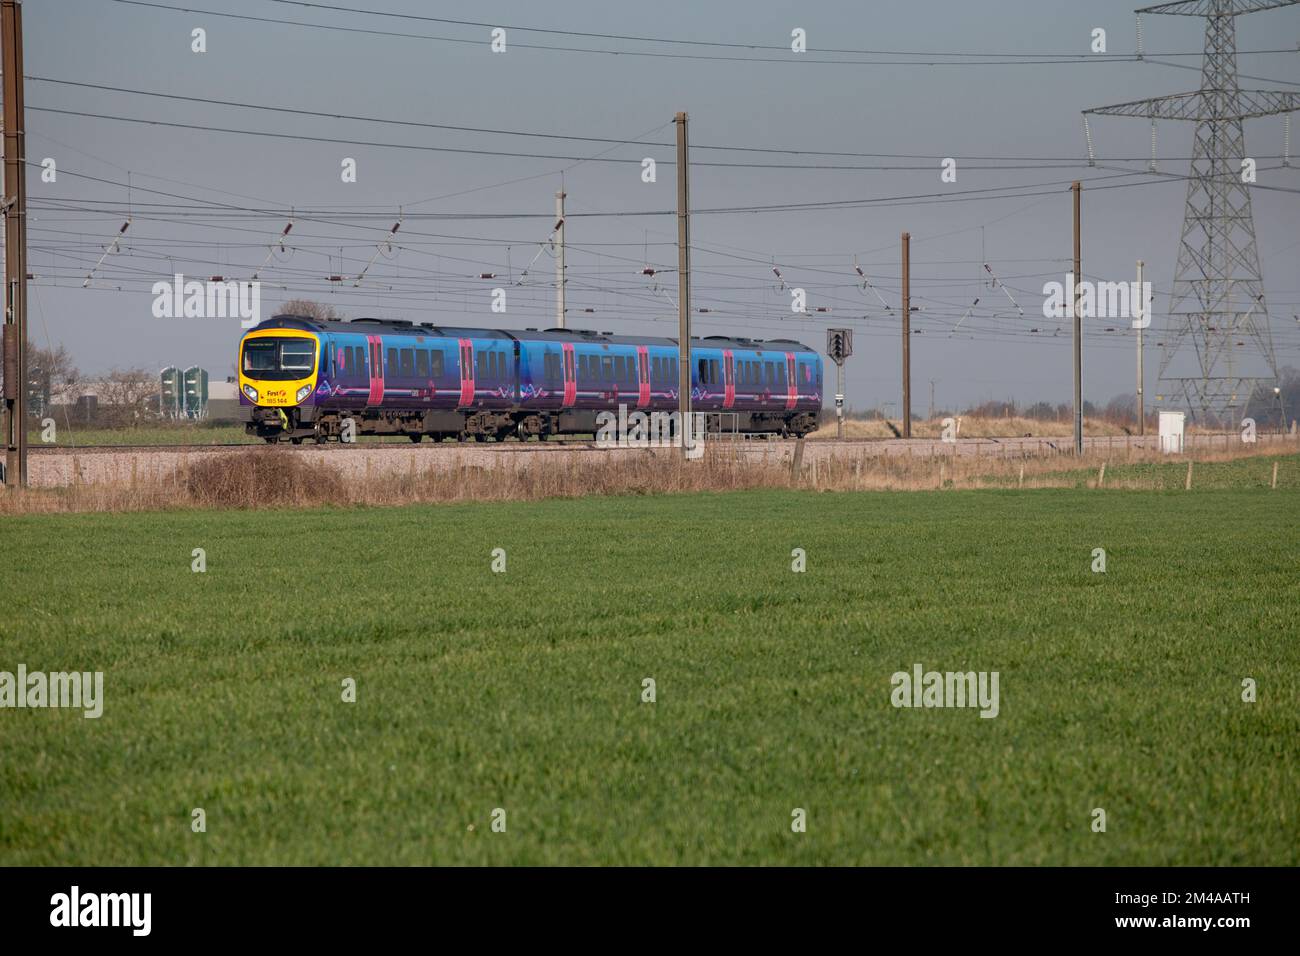 First Transpennine Express class 185 diesel train 185144 on the electrified east coast mainline at Sessay Stock Photo